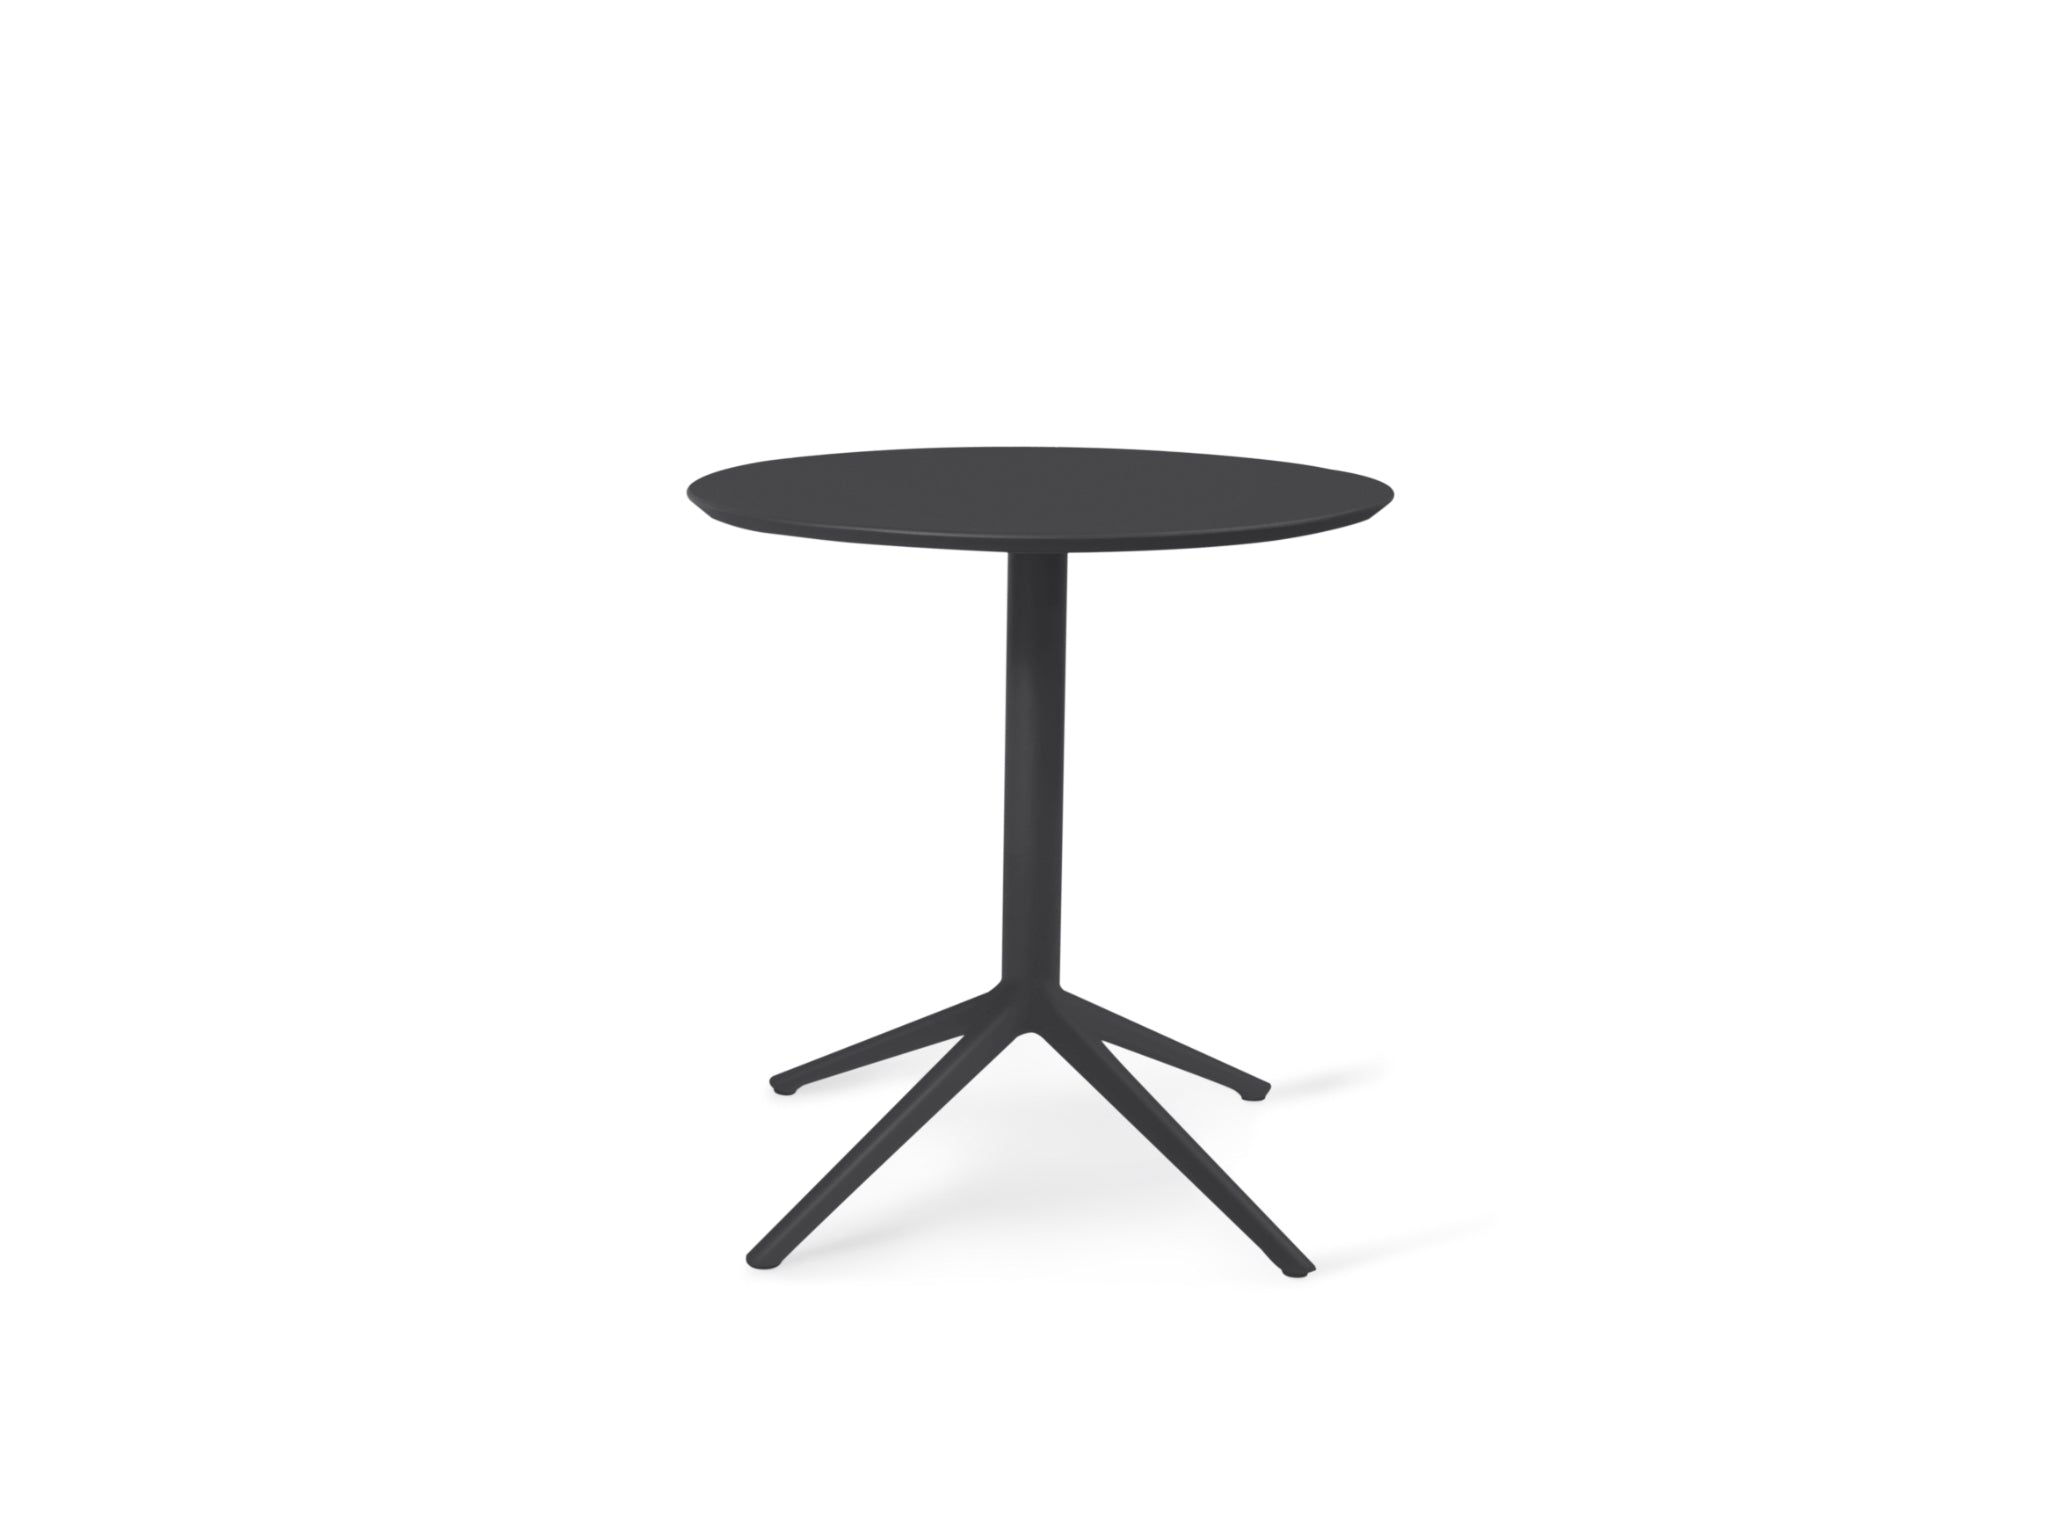 SIMPO by Sunlongarden Aimmi Round Dining Table